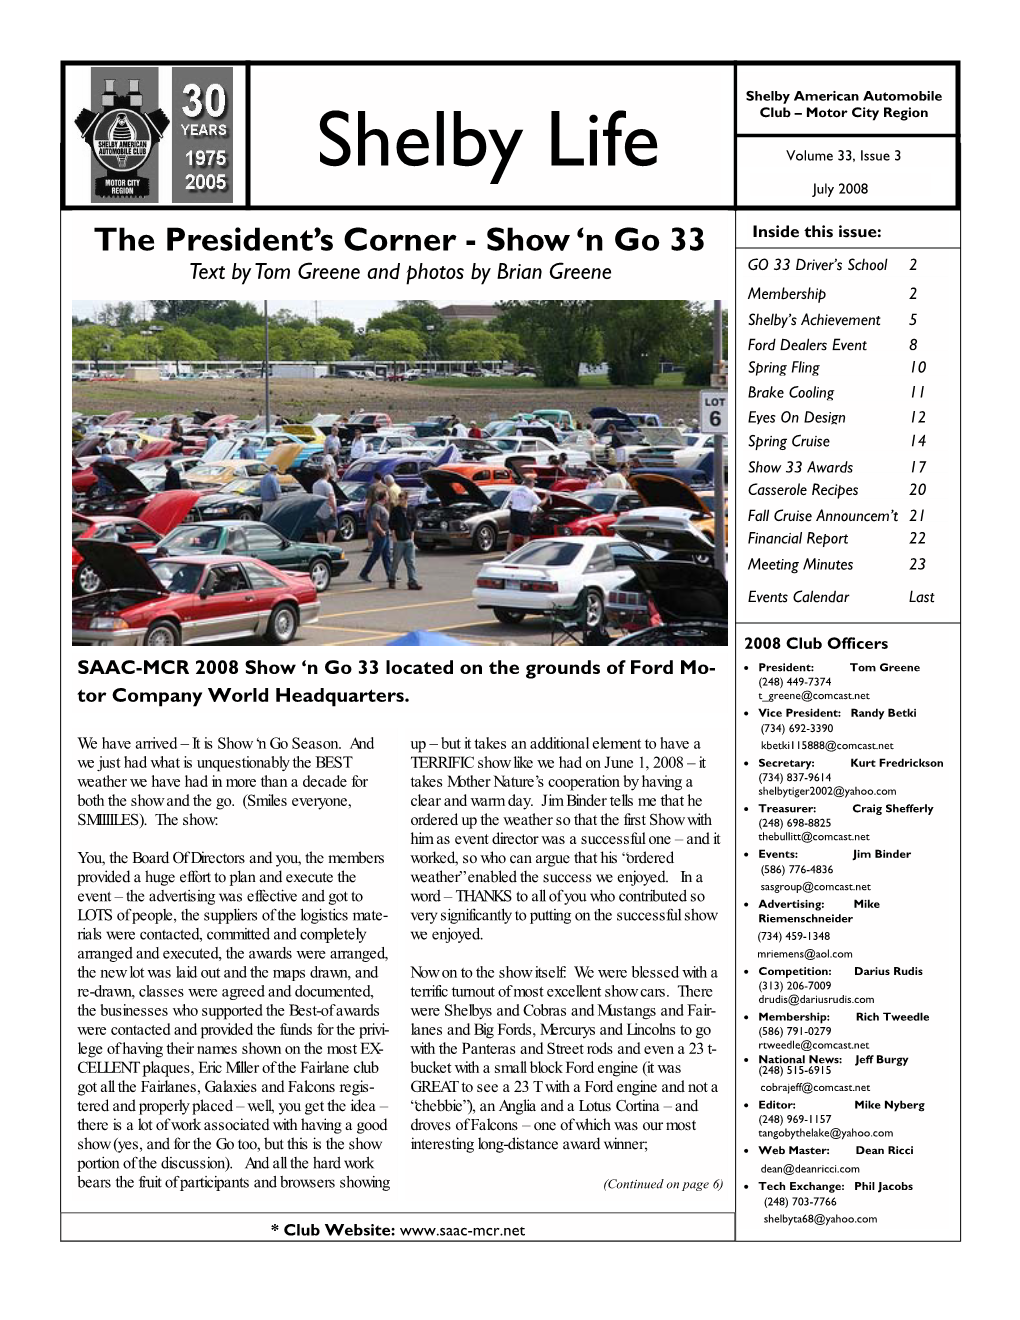 2008 Shelby Life Vol 33 Issue 3 Hard Copy for Mailing